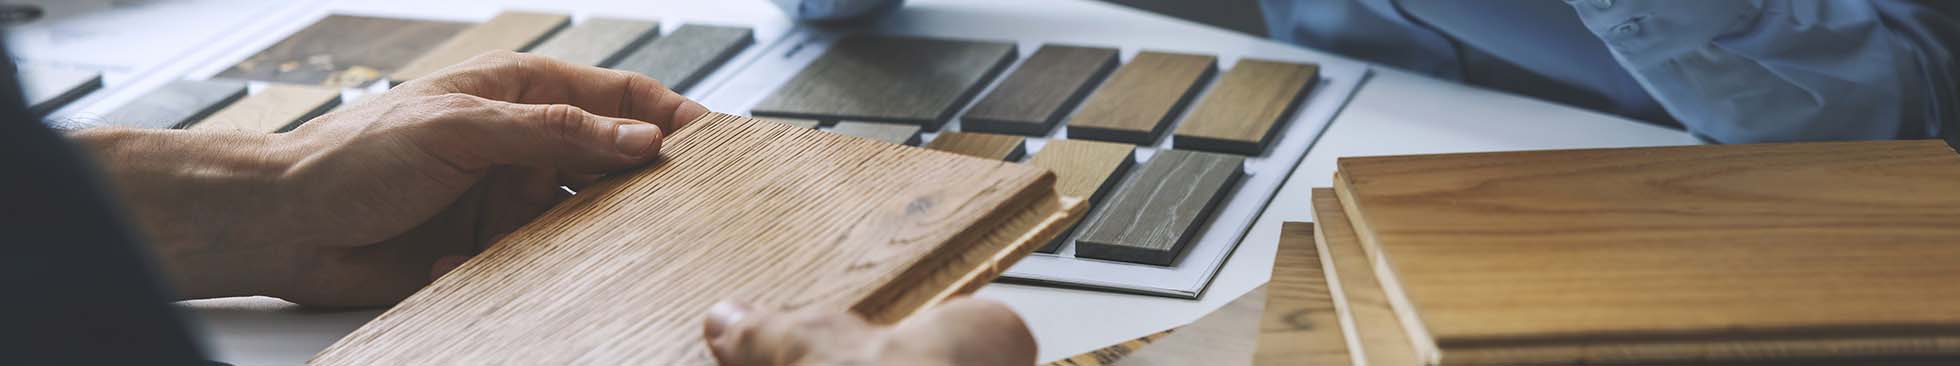 Architect holding wood sample with table displaying other color swatches